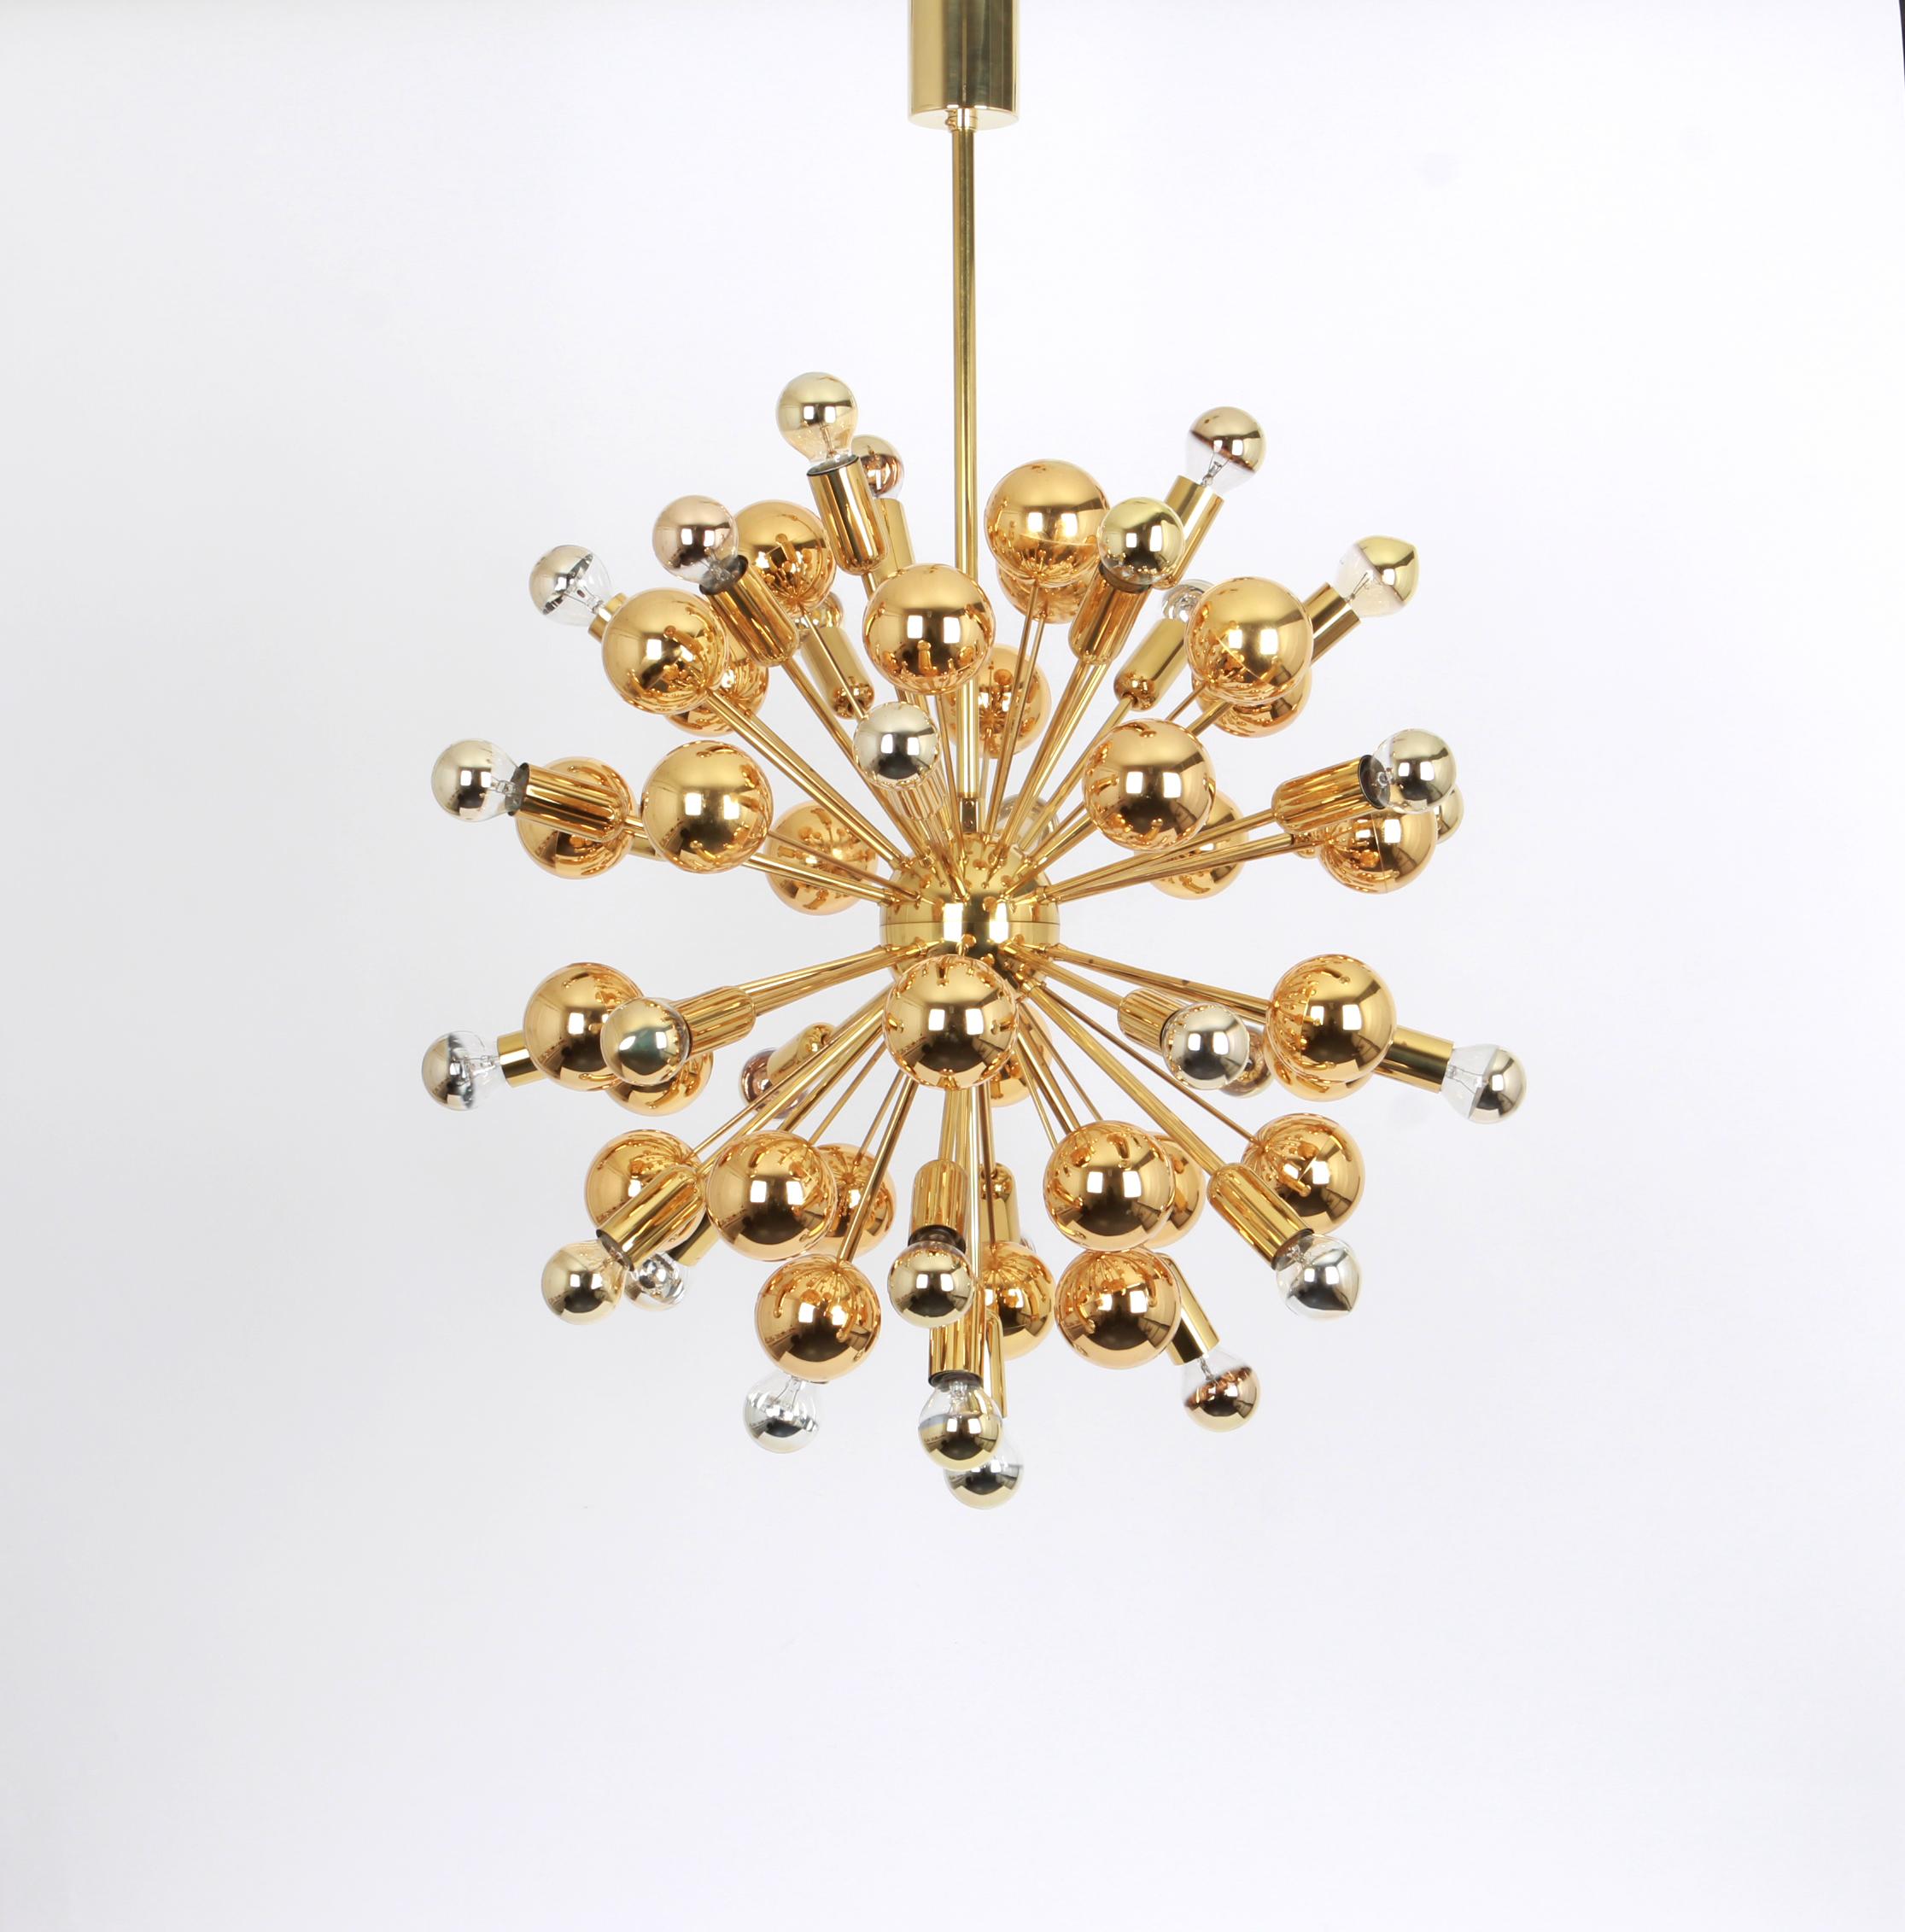 Exclusive and rare brass Sputnik pendant lamp designed by Cosack during the 1970s.

Sockets: It needs 31 x E14 small bulb and function on voltage from 110 till 240 volts.
Dimensions: 
Diameter: 24